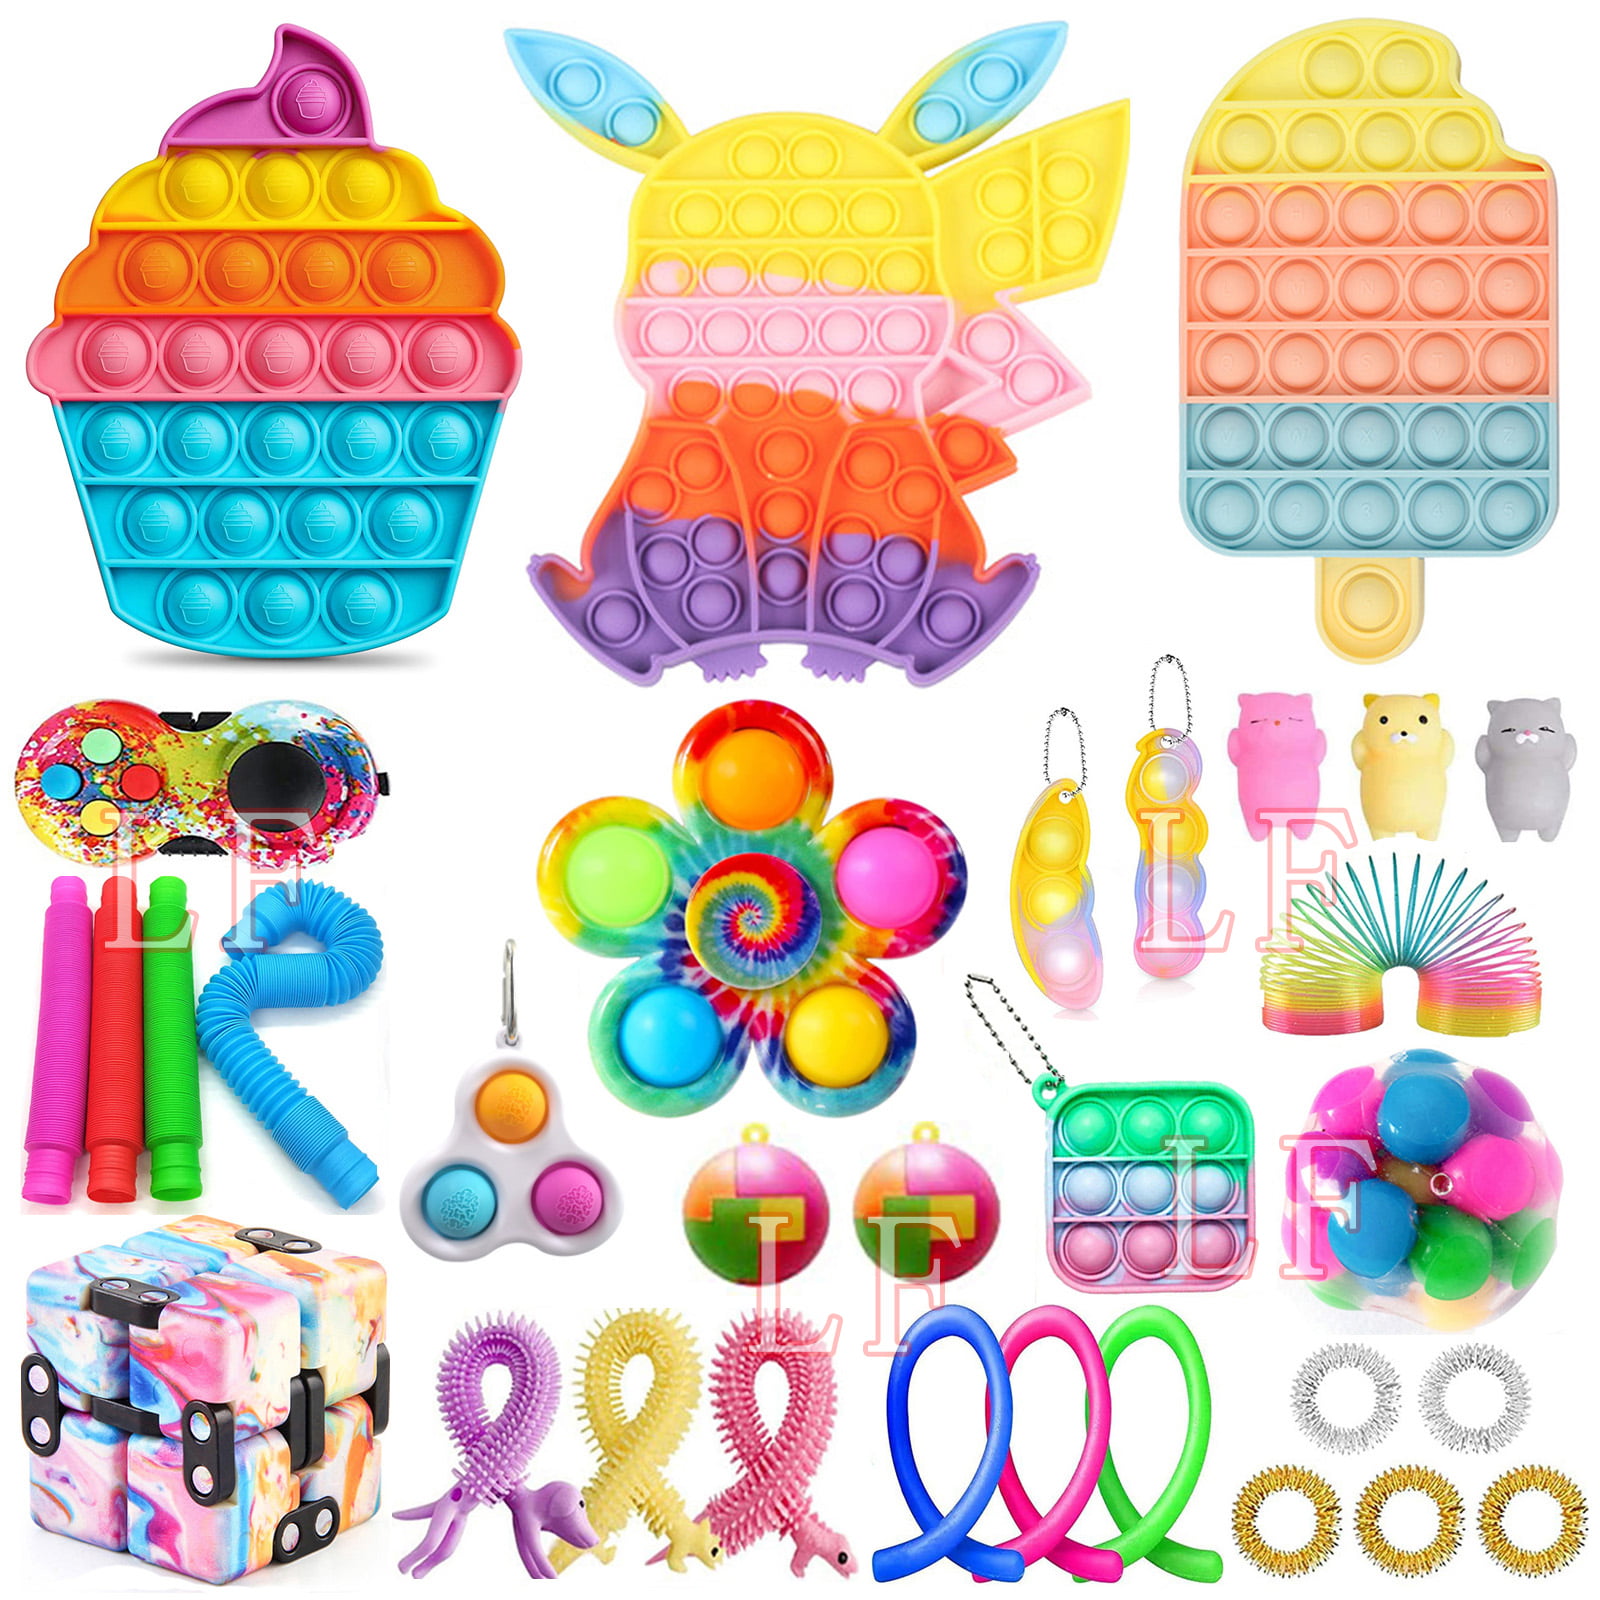 Fidget Toys Pack,50 Pcs Fidget Toy Set for Kids Adults,Sensory Toys that can Relieve the Stress of Autism,Value Package Each one is Decompressed and Fun and Creative,Toys that You can't Put It Down 